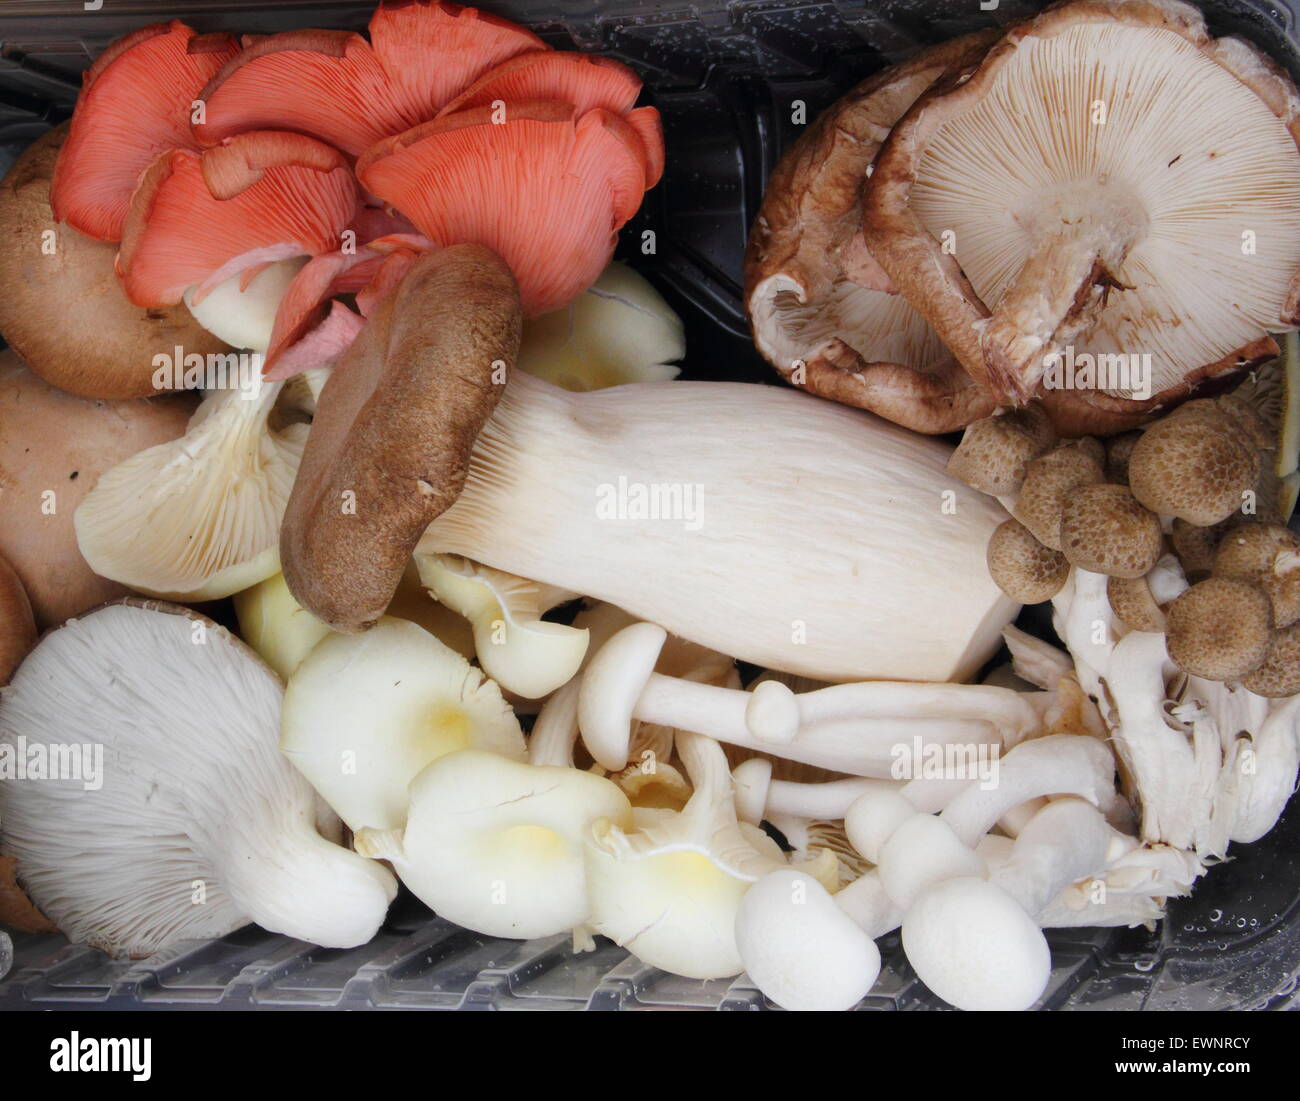 A variety of exotic edible mushrooms are offered for sale at a food market in Derbyshire England UK Stock Photo